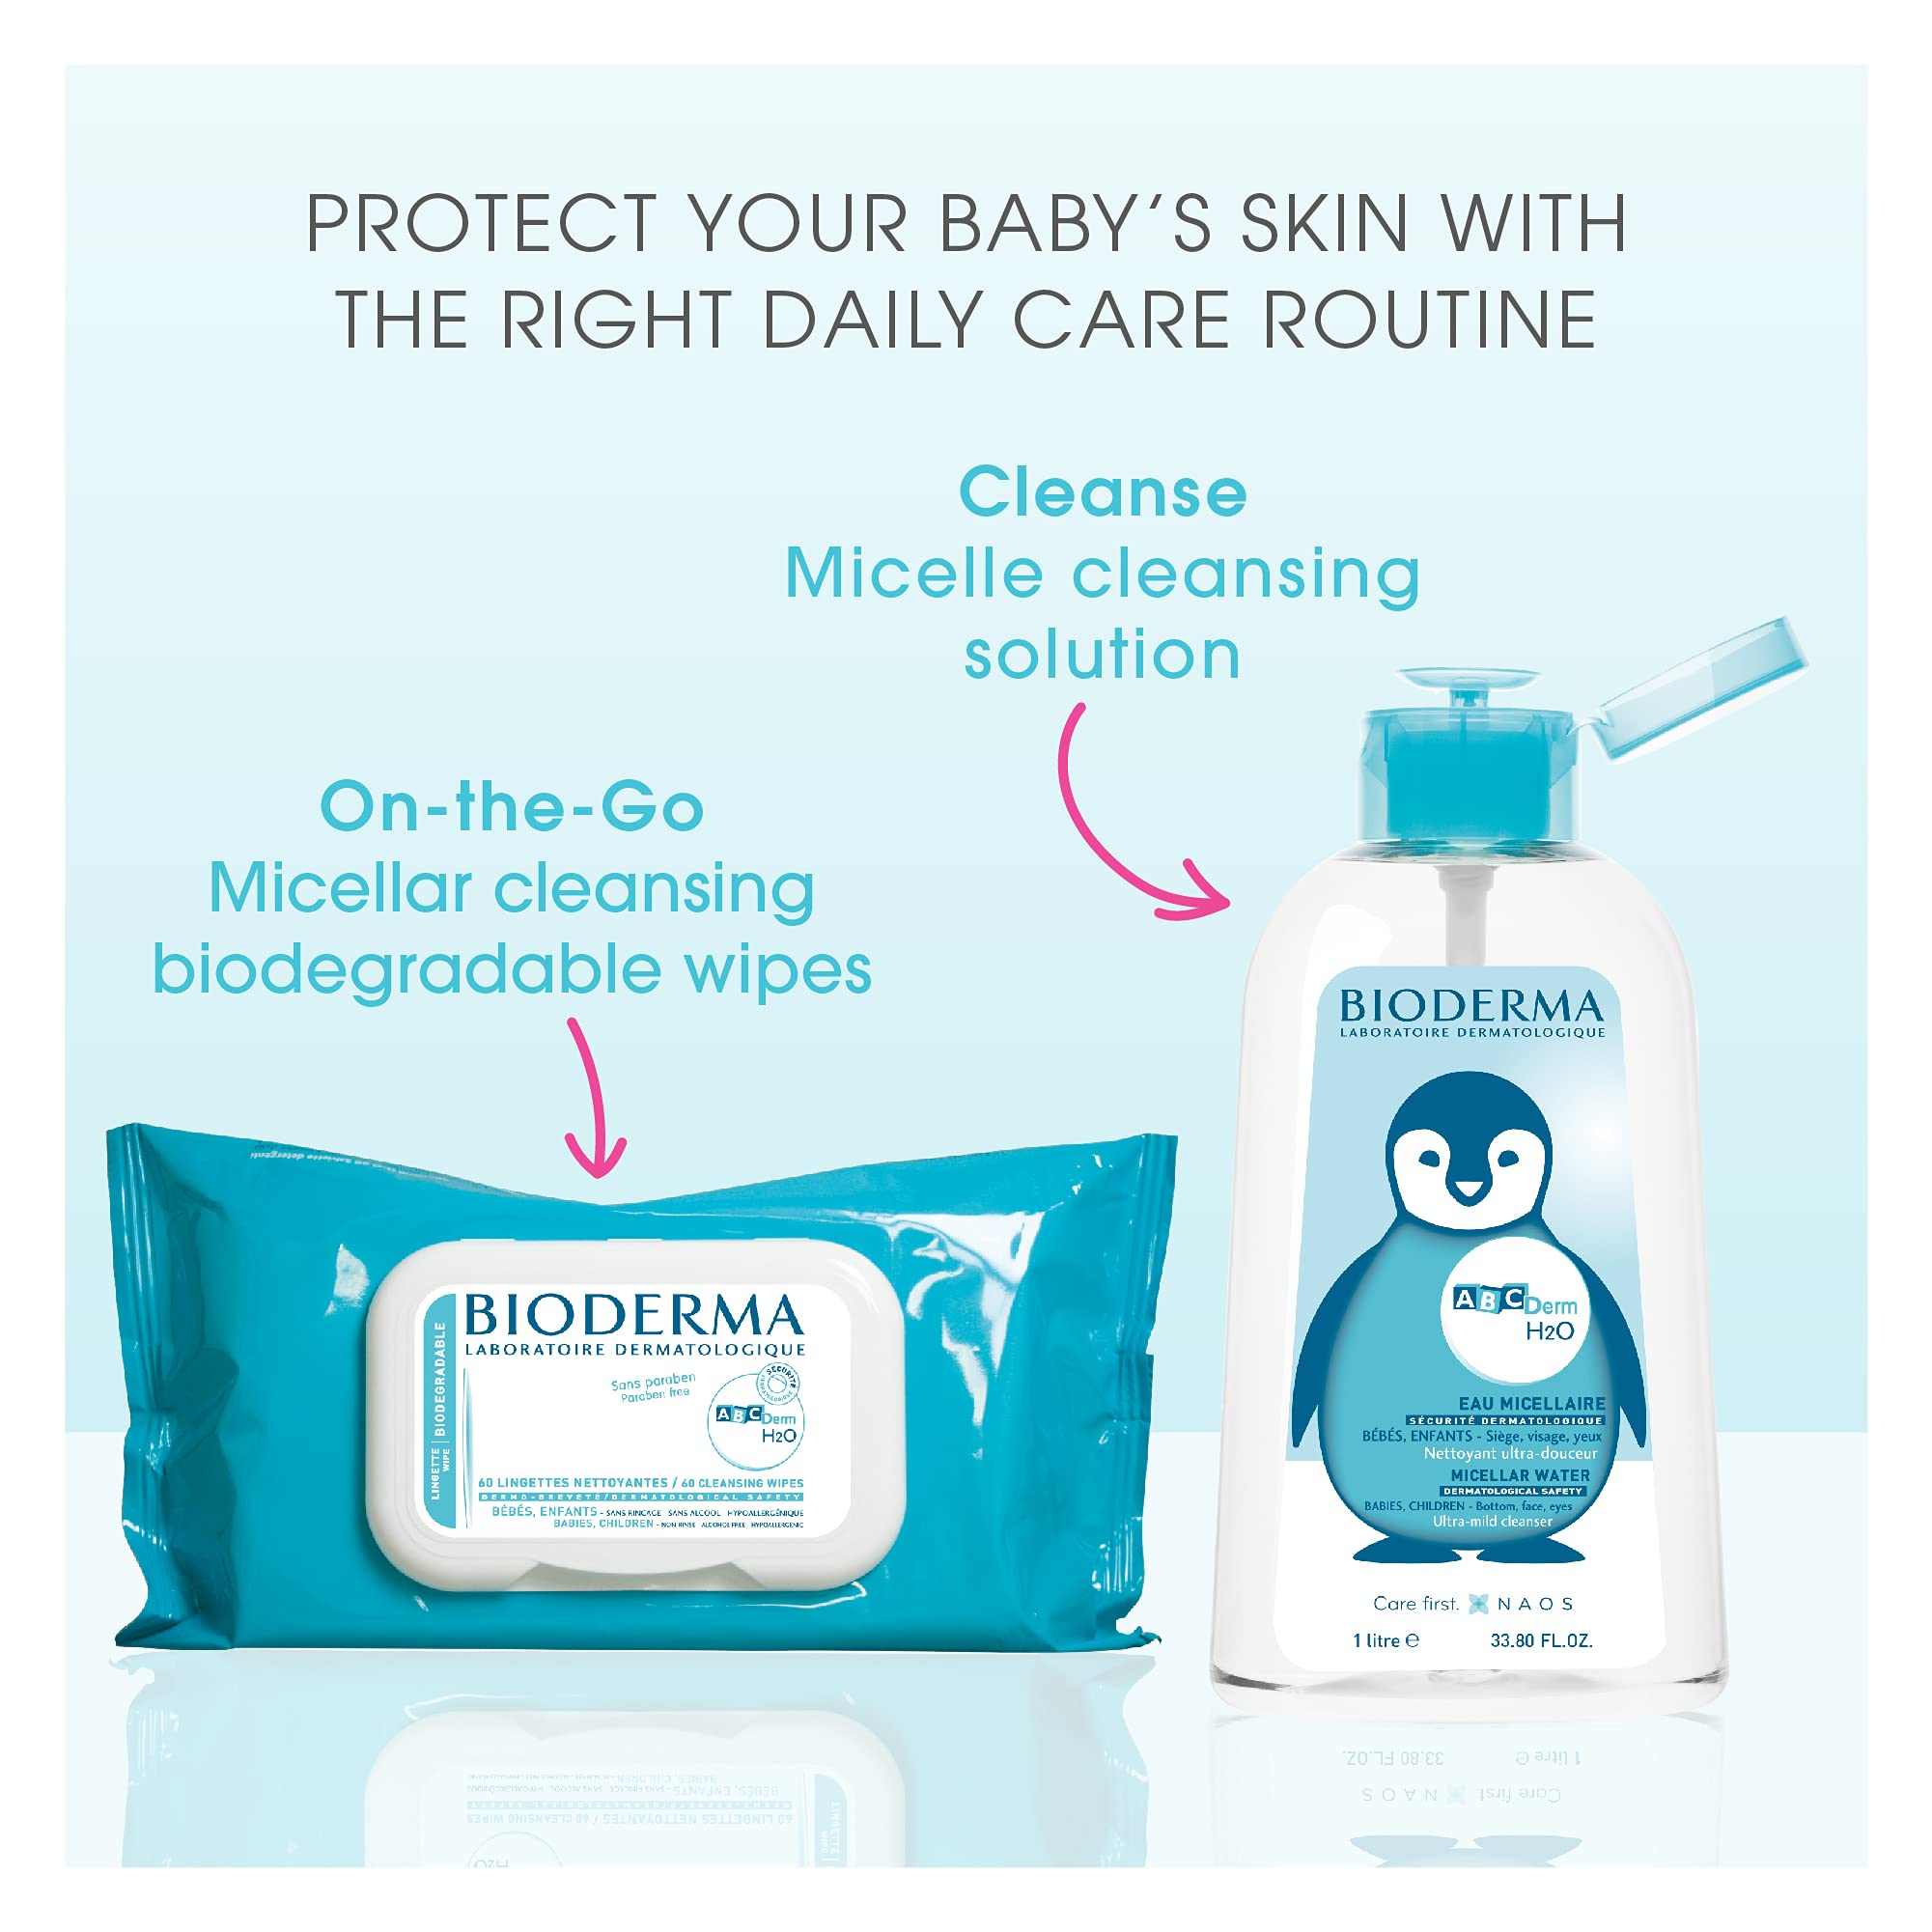 Bioderma ABCDerm Foaming Gel- for the Delicate Skin of Babies and Children, Blue, 33.8 Fl Oz